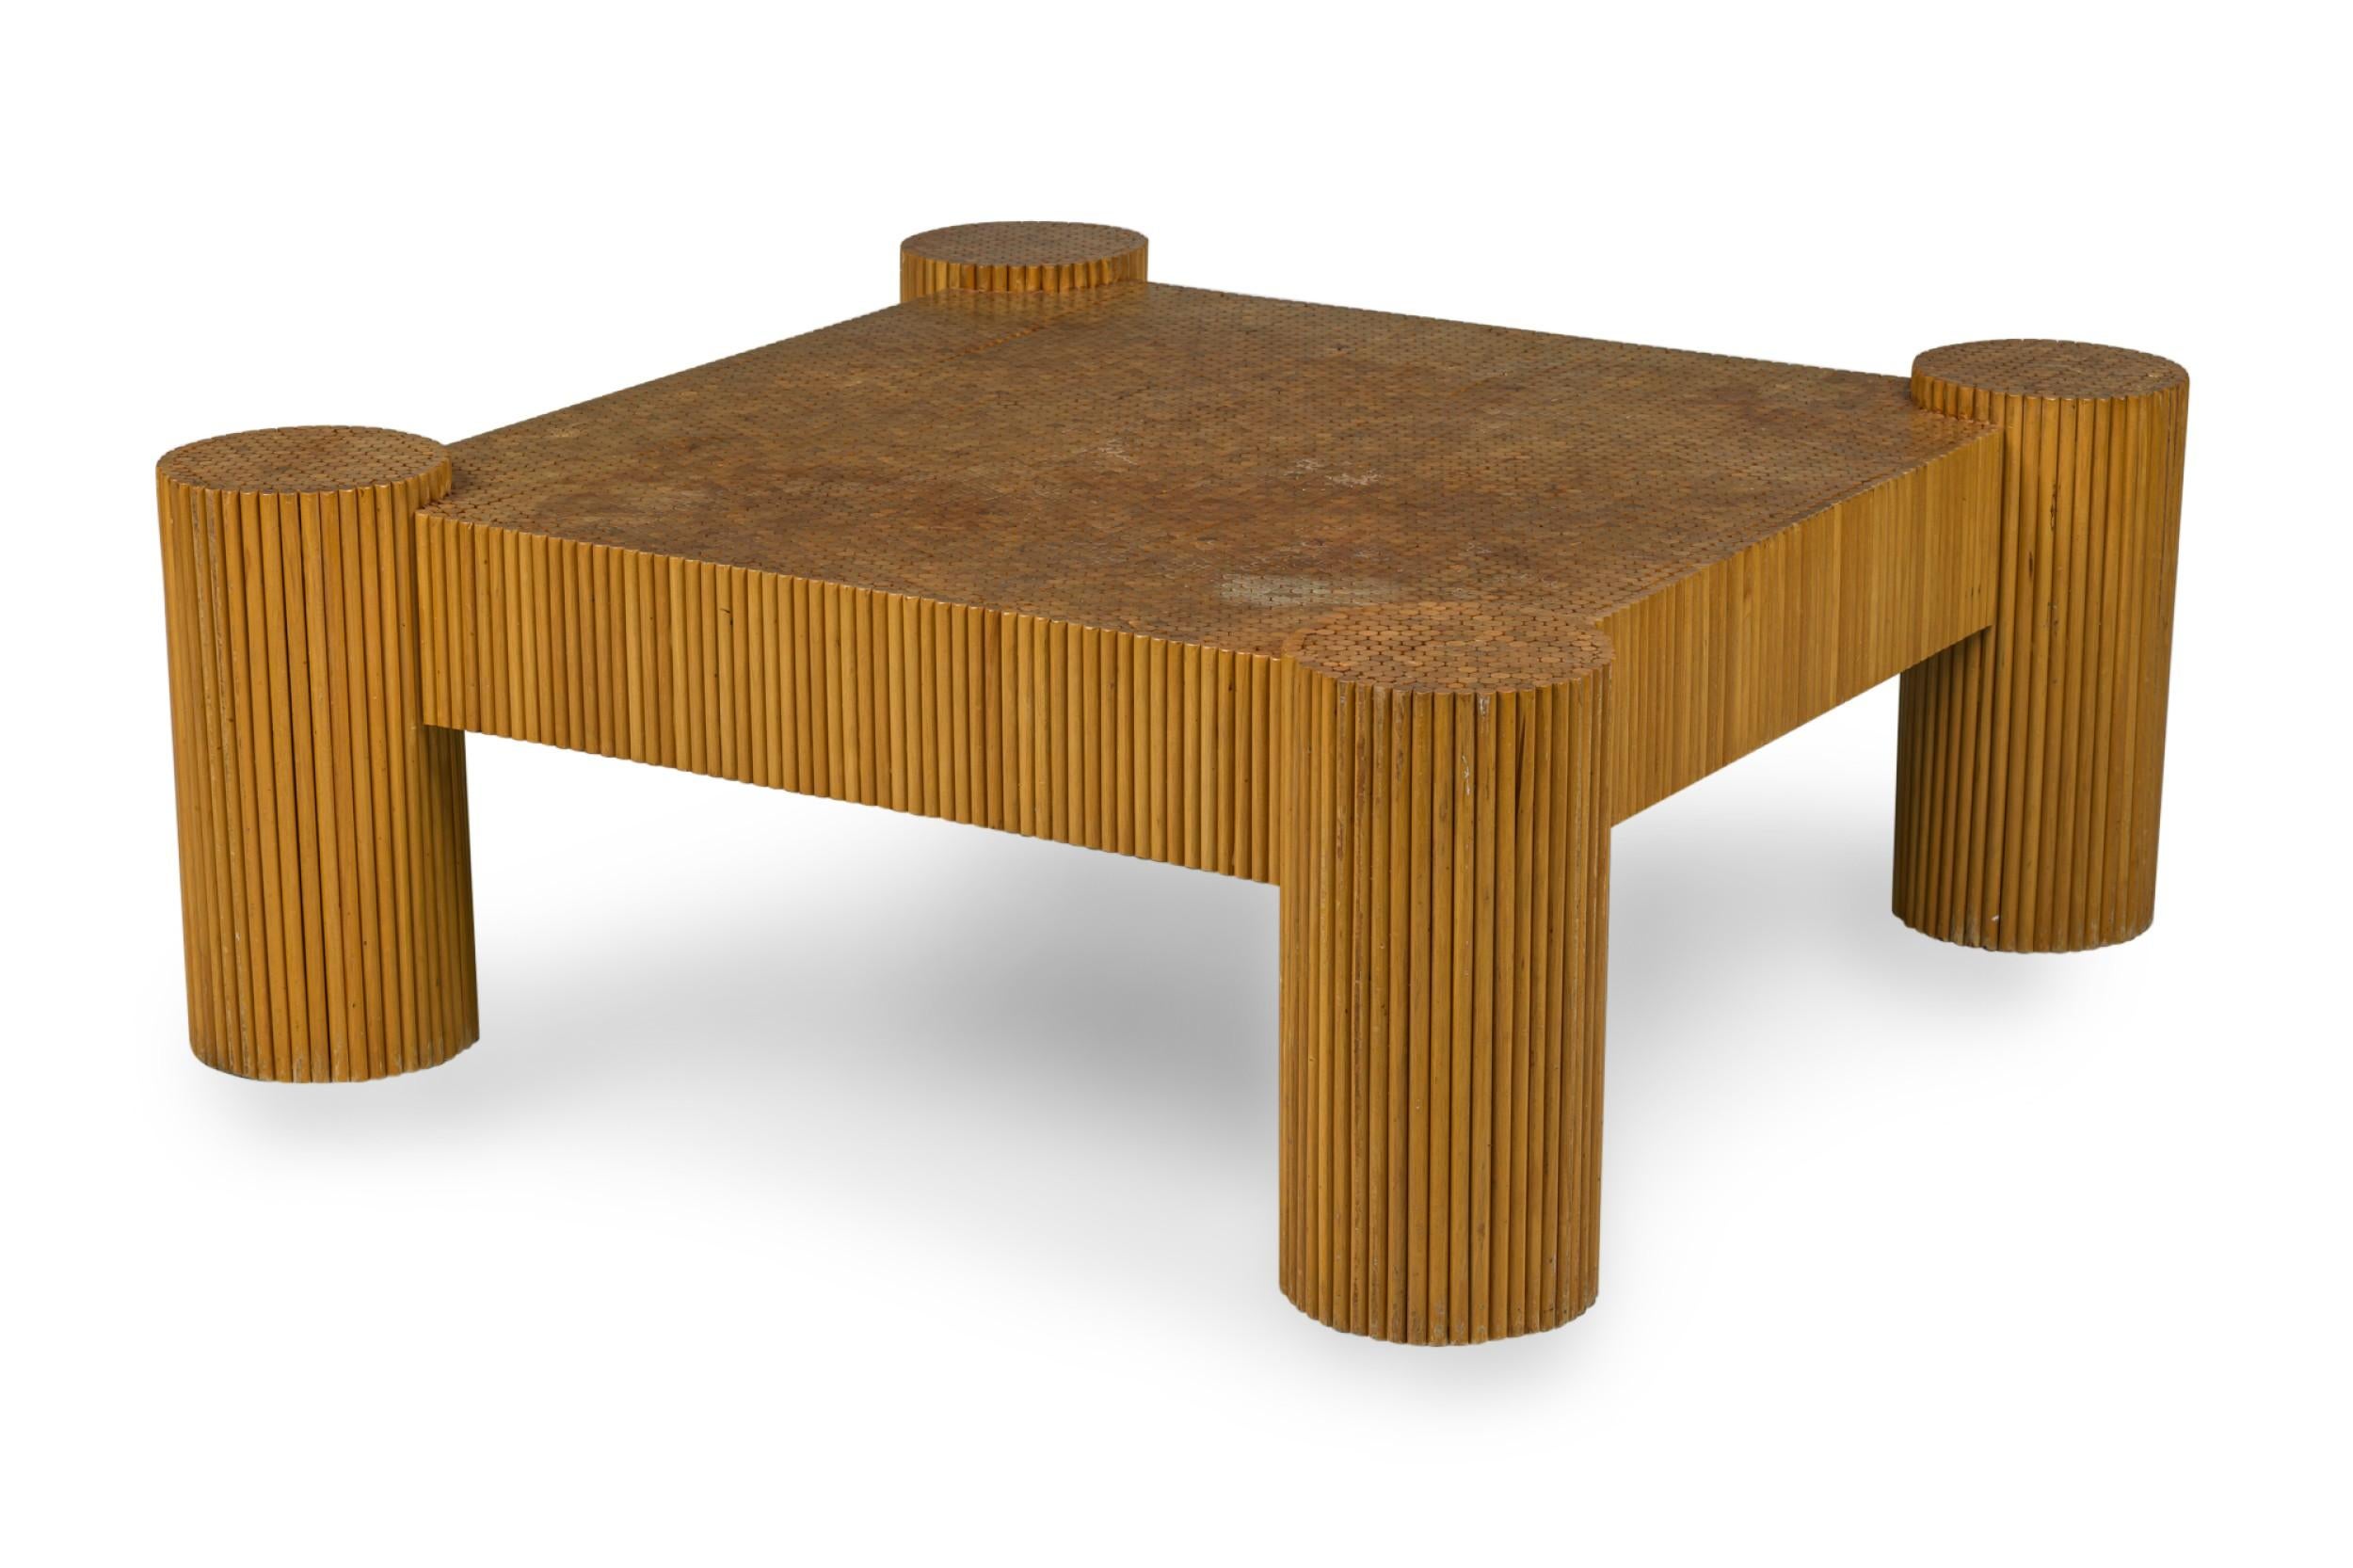 American Mid-Century Modern coffee table with square top and four exterior cylindrical legs comprised of bonded bamboo dowels. (ERNEST C. MASI)
 

 Minor wear to finish.
